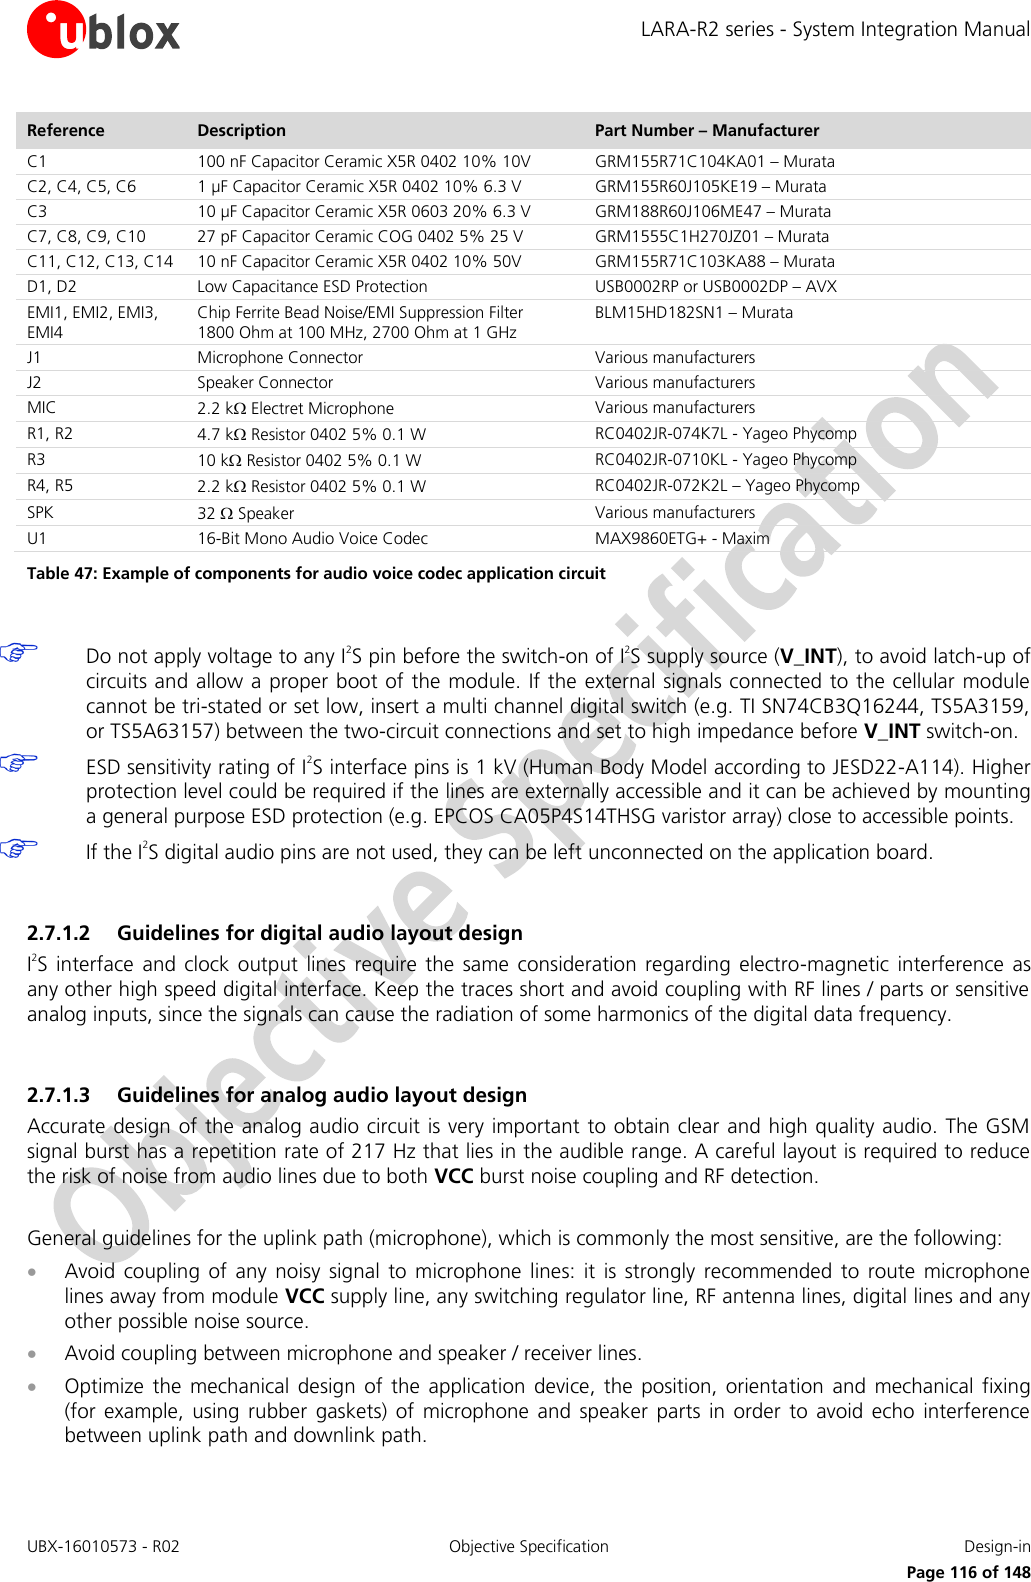 LARA-R2 series - System Integration Manual UBX-16010573 - R02  Objective Specification  Design-in     Page 116 of 148 Reference Description Part Number – Manufacturer C1 100 nF Capacitor Ceramic X5R 0402 10% 10V GRM155R71C104KA01 – Murata C2, C4, C5, C6 1 µF Capacitor Ceramic X5R 0402 10% 6.3 V GRM155R60J105KE19 – Murata C3 10 µF Capacitor Ceramic X5R 0603 20% 6.3 V GRM188R60J106ME47 – Murata C7, C8, C9, C10 27 pF Capacitor Ceramic COG 0402 5% 25 V  GRM1555C1H270JZ01 – Murata C11, C12, C13, C14 10 nF Capacitor Ceramic X5R 0402 10% 50V GRM155R71C103KA88 – Murata D1, D2 Low Capacitance ESD Protection USB0002RP or USB0002DP – AVX EMI1, EMI2, EMI3, EMI4 Chip Ferrite Bead Noise/EMI Suppression Filter 1800 Ohm at 100 MHz, 2700 Ohm at 1 GHz BLM15HD182SN1 – Murata J1 Microphone Connector Various manufacturers  J2 Speaker Connector Various manufacturers  MIC 2.2 k Electret Microphone Various manufacturers R1, R2  4.7 k Resistor 0402 5% 0.1 W  RC0402JR-074K7L - Yageo Phycomp R3 10 k Resistor 0402 5% 0.1 W  RC0402JR-0710KL - Yageo Phycomp R4, R5 2.2 k Resistor 0402 5% 0.1 W  RC0402JR-072K2L – Yageo Phycomp SPK 32  Speaker Various manufacturers  U1 16-Bit Mono Audio Voice Codec MAX9860ETG+ - Maxim Table 47: Example of components for audio voice codec application circuit   Do not apply voltage to any I2S pin before the switch-on of I2S supply source (V_INT), to avoid latch-up of circuits and allow a proper  boot of the module. If the external signals connected to the cellular module cannot be tri-stated or set low, insert a multi channel digital switch (e.g. TI SN74CB3Q16244, TS5A3159, or TS5A63157) between the two-circuit connections and set to high impedance before V_INT switch-on.  ESD sensitivity rating of I2S interface pins is 1 kV (Human Body Model according to JESD22-A114). Higher protection level could be required if the lines are externally accessible and it can be achieved by mounting a general purpose ESD protection (e.g. EPCOS CA05P4S14THSG varistor array) close to accessible points.  If the I2S digital audio pins are not used, they can be left unconnected on the application board.  2.7.1.2 Guidelines for digital audio layout design I2S  interface  and clock  output  lines  require  the  same  consideration  regarding  electro-magnetic  interference  as any other high speed digital interface. Keep the traces short and avoid coupling with RF lines / parts or sensitive analog inputs, since the signals can cause the radiation of some harmonics of the digital data frequency.  2.7.1.3 Guidelines for analog audio layout design Accurate design of the analog audio circuit is very important to obtain clear and high quality audio. The GSM signal burst has a repetition rate of 217 Hz that lies in the audible range. A careful layout is required to reduce the risk of noise from audio lines due to both VCC burst noise coupling and RF detection.  General guidelines for the uplink path (microphone), which is commonly the most sensitive, are the following:  Avoid  coupling  of  any  noisy  signal  to  microphone  lines:  it  is  strongly  recommended  to  route  microphone lines away from module VCC supply line, any switching regulator line, RF antenna lines, digital lines and any other possible noise source.  Avoid coupling between microphone and speaker / receiver lines.  Optimize  the  mechanical  design  of  the  application  device,  the  position,  orientation  and  mechanical  fixing (for  example,  using  rubber  gaskets)  of  microphone  and  speaker  parts  in  order  to  avoid echo  interference between uplink path and downlink path. 